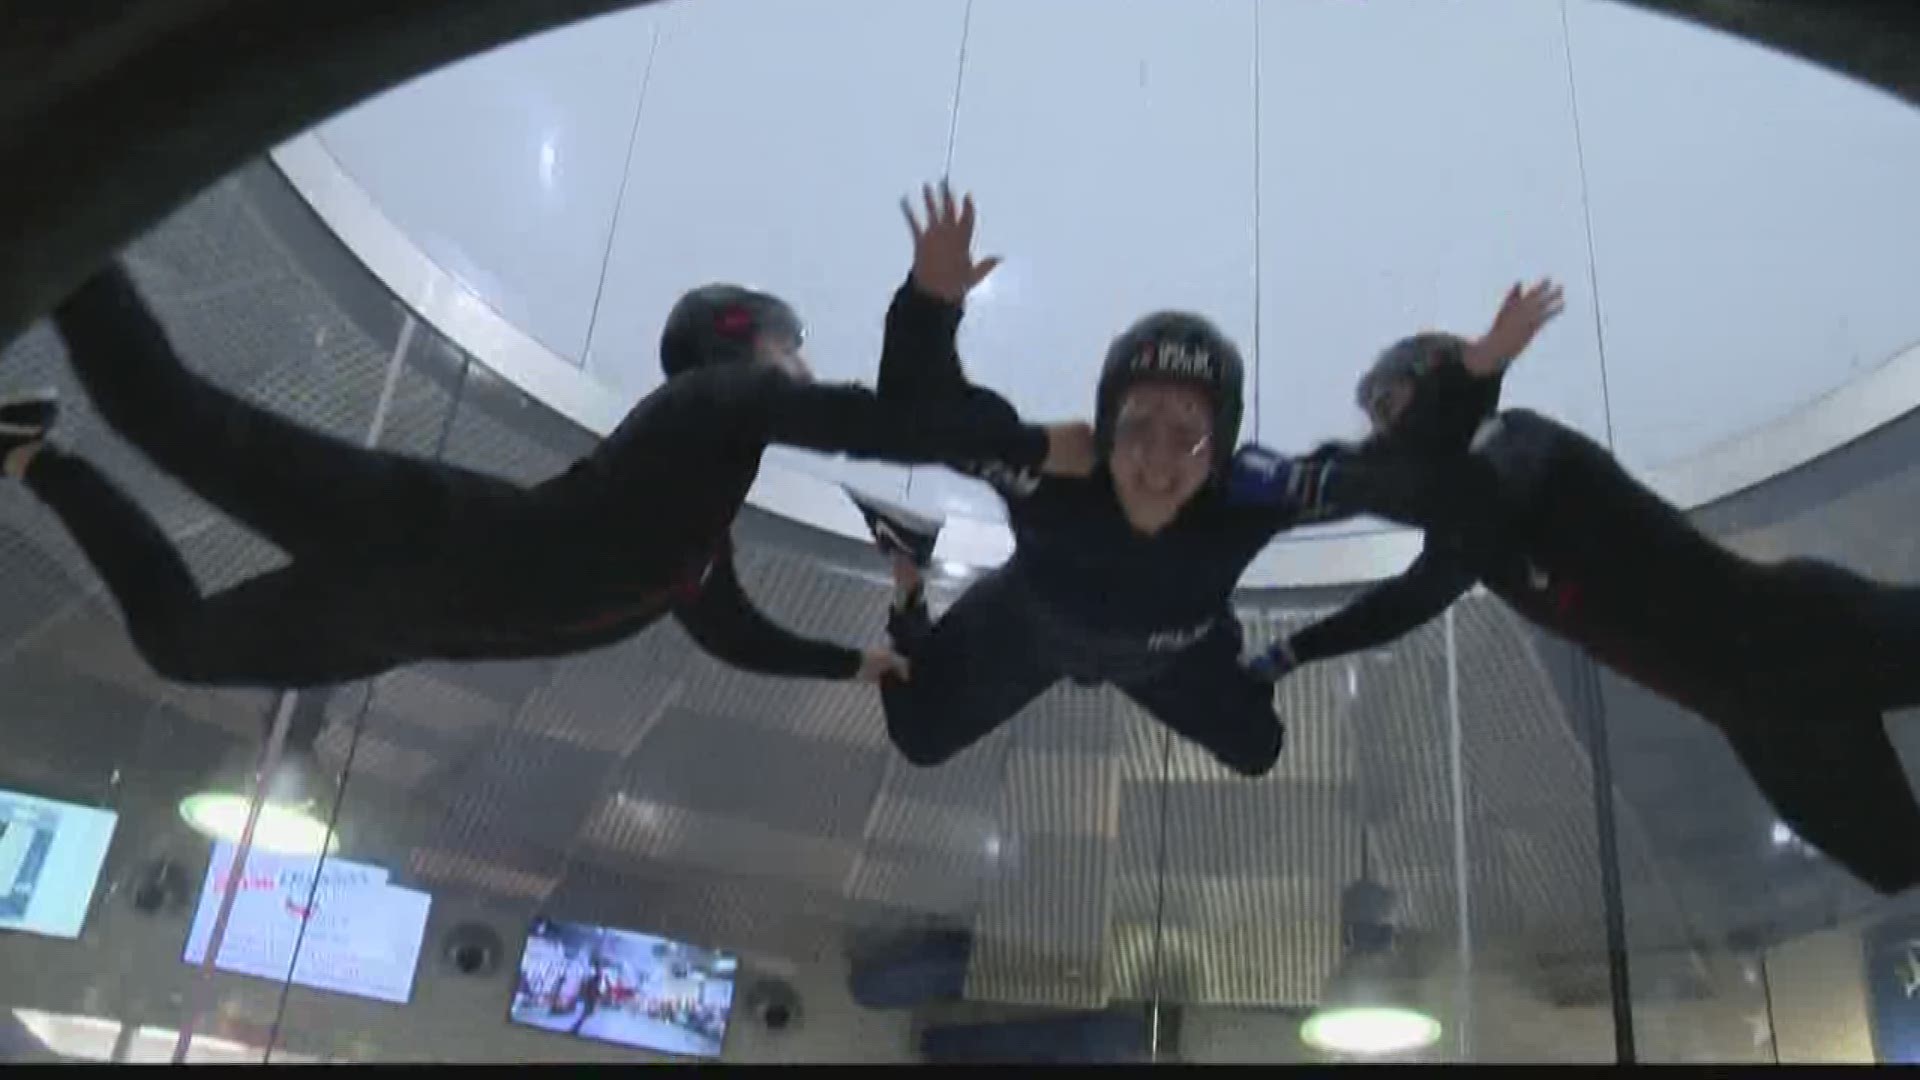 A group of people with spinal cord injuries visited iFly Virginia Beach to experience what it feels like to skydive.